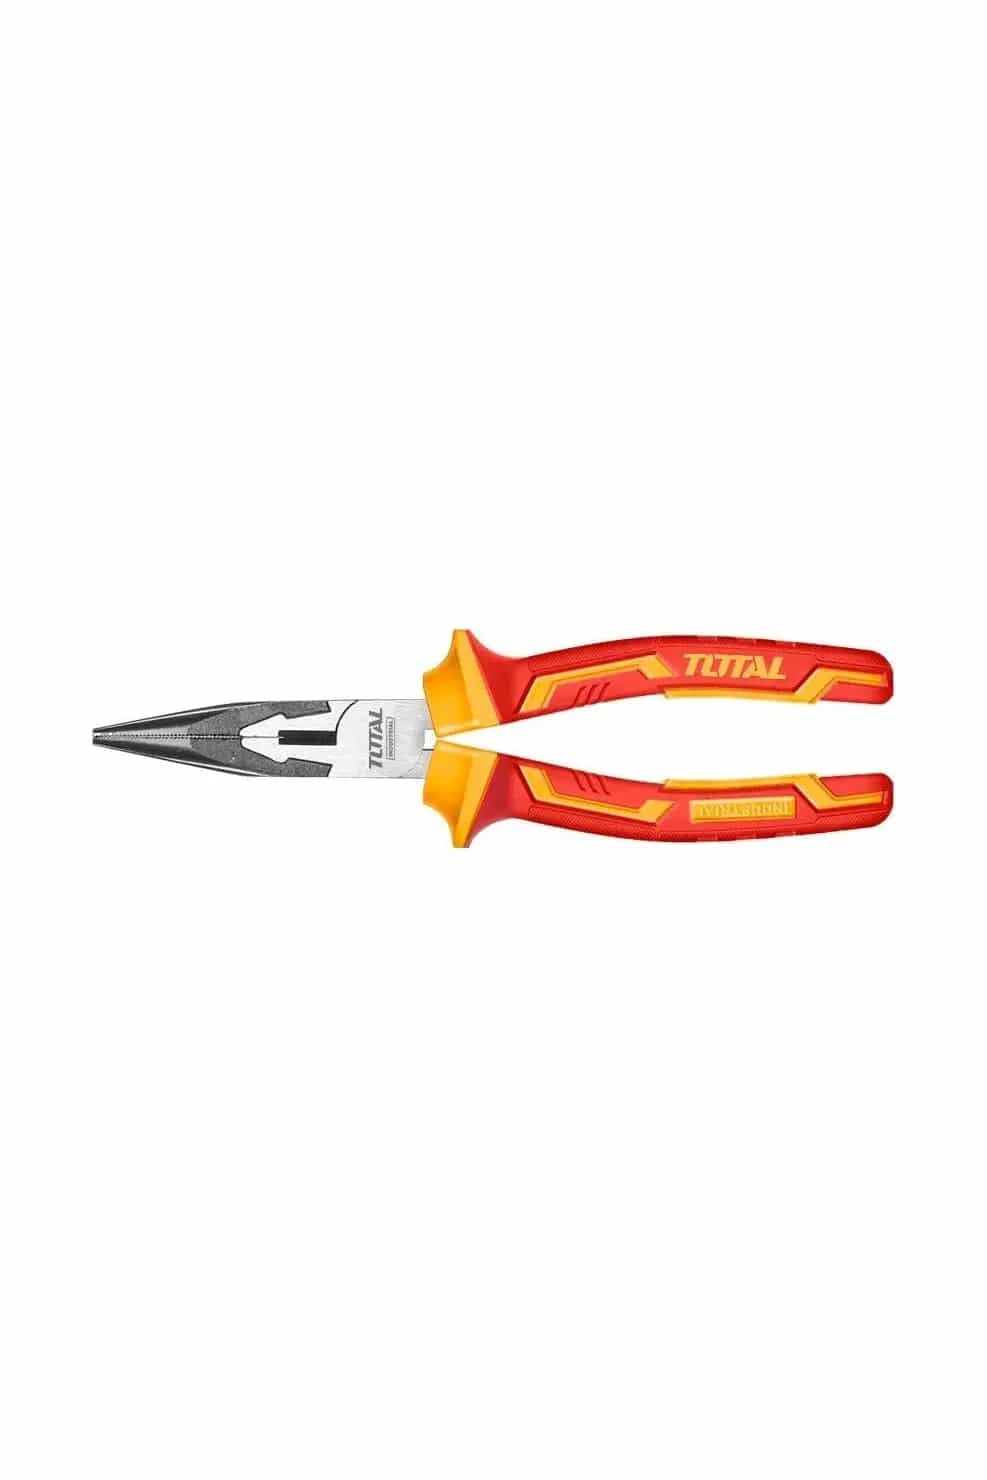 TOTAL INSULATED LONG NOSE PLIERS - Elite Renewable Solutions